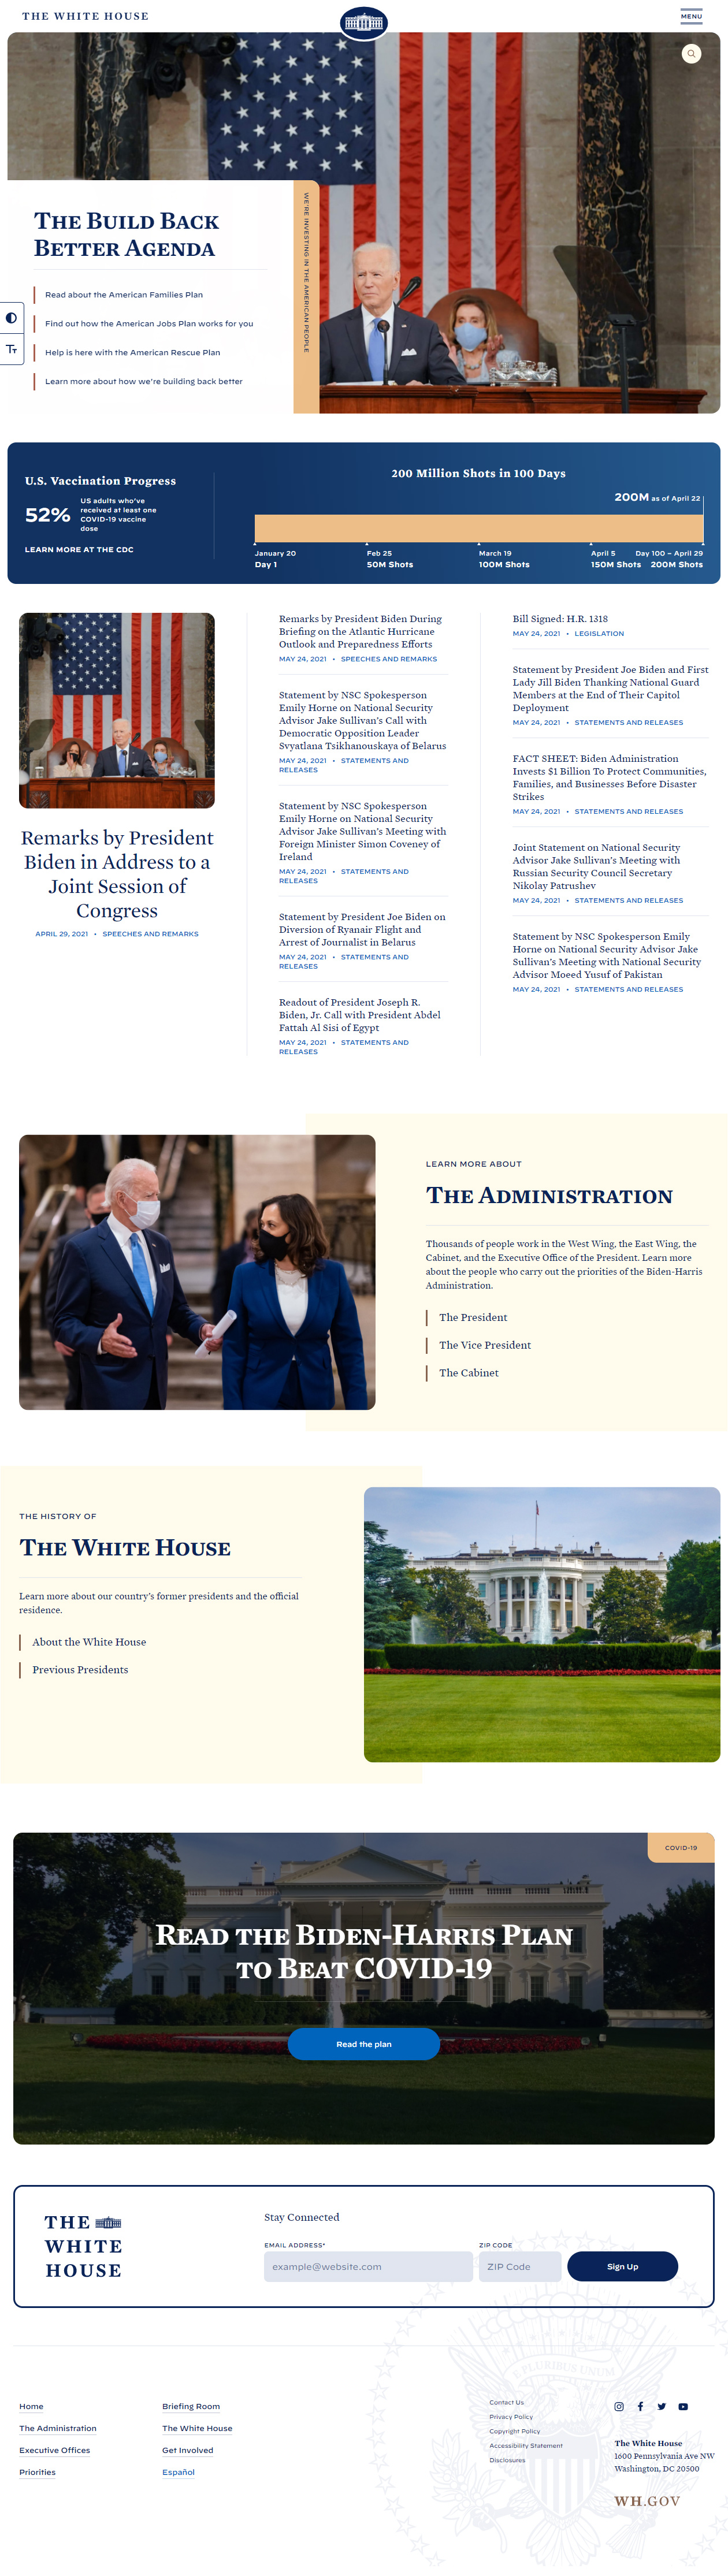 The White House website in 2021